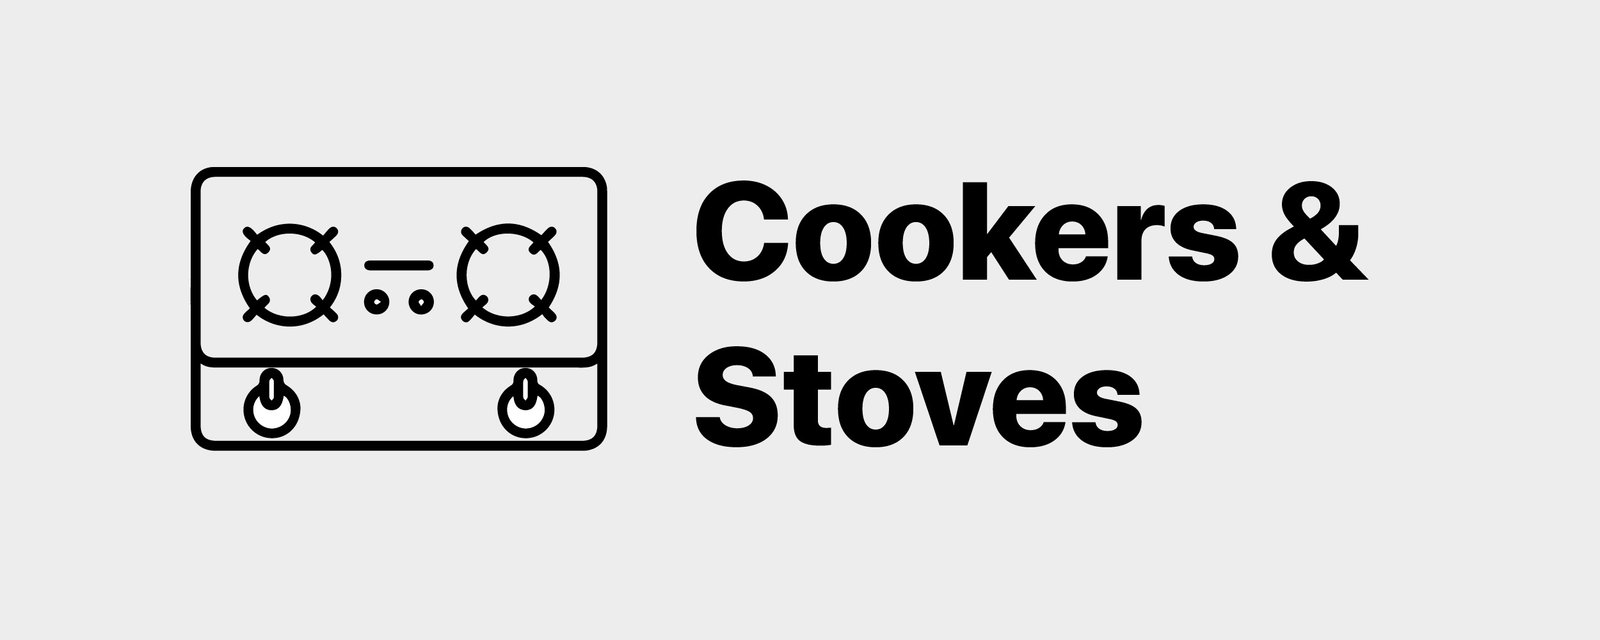 Cookers and stoves